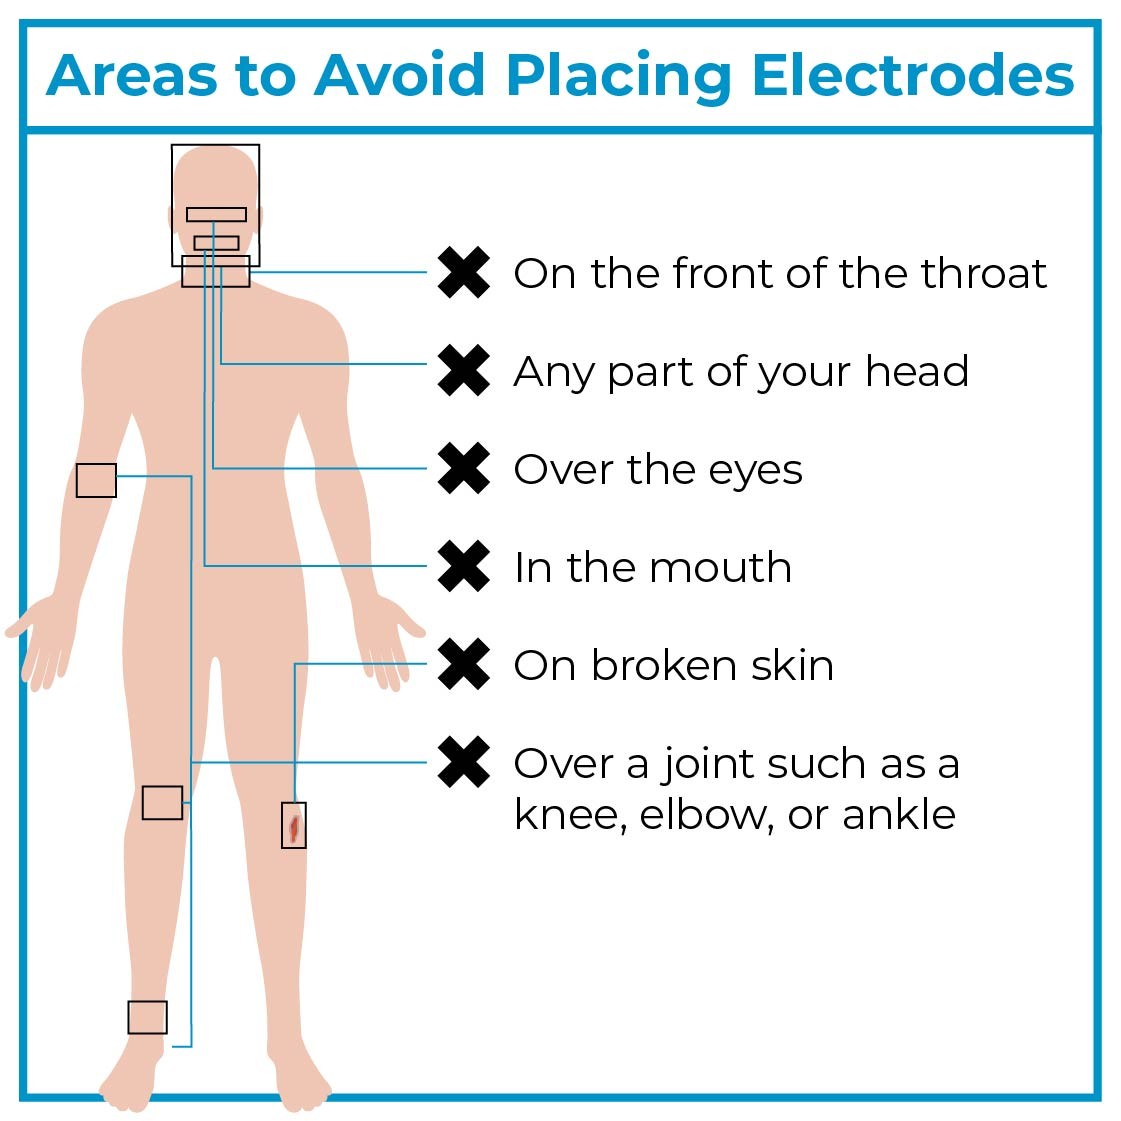 Areas to avoid placing electrodes